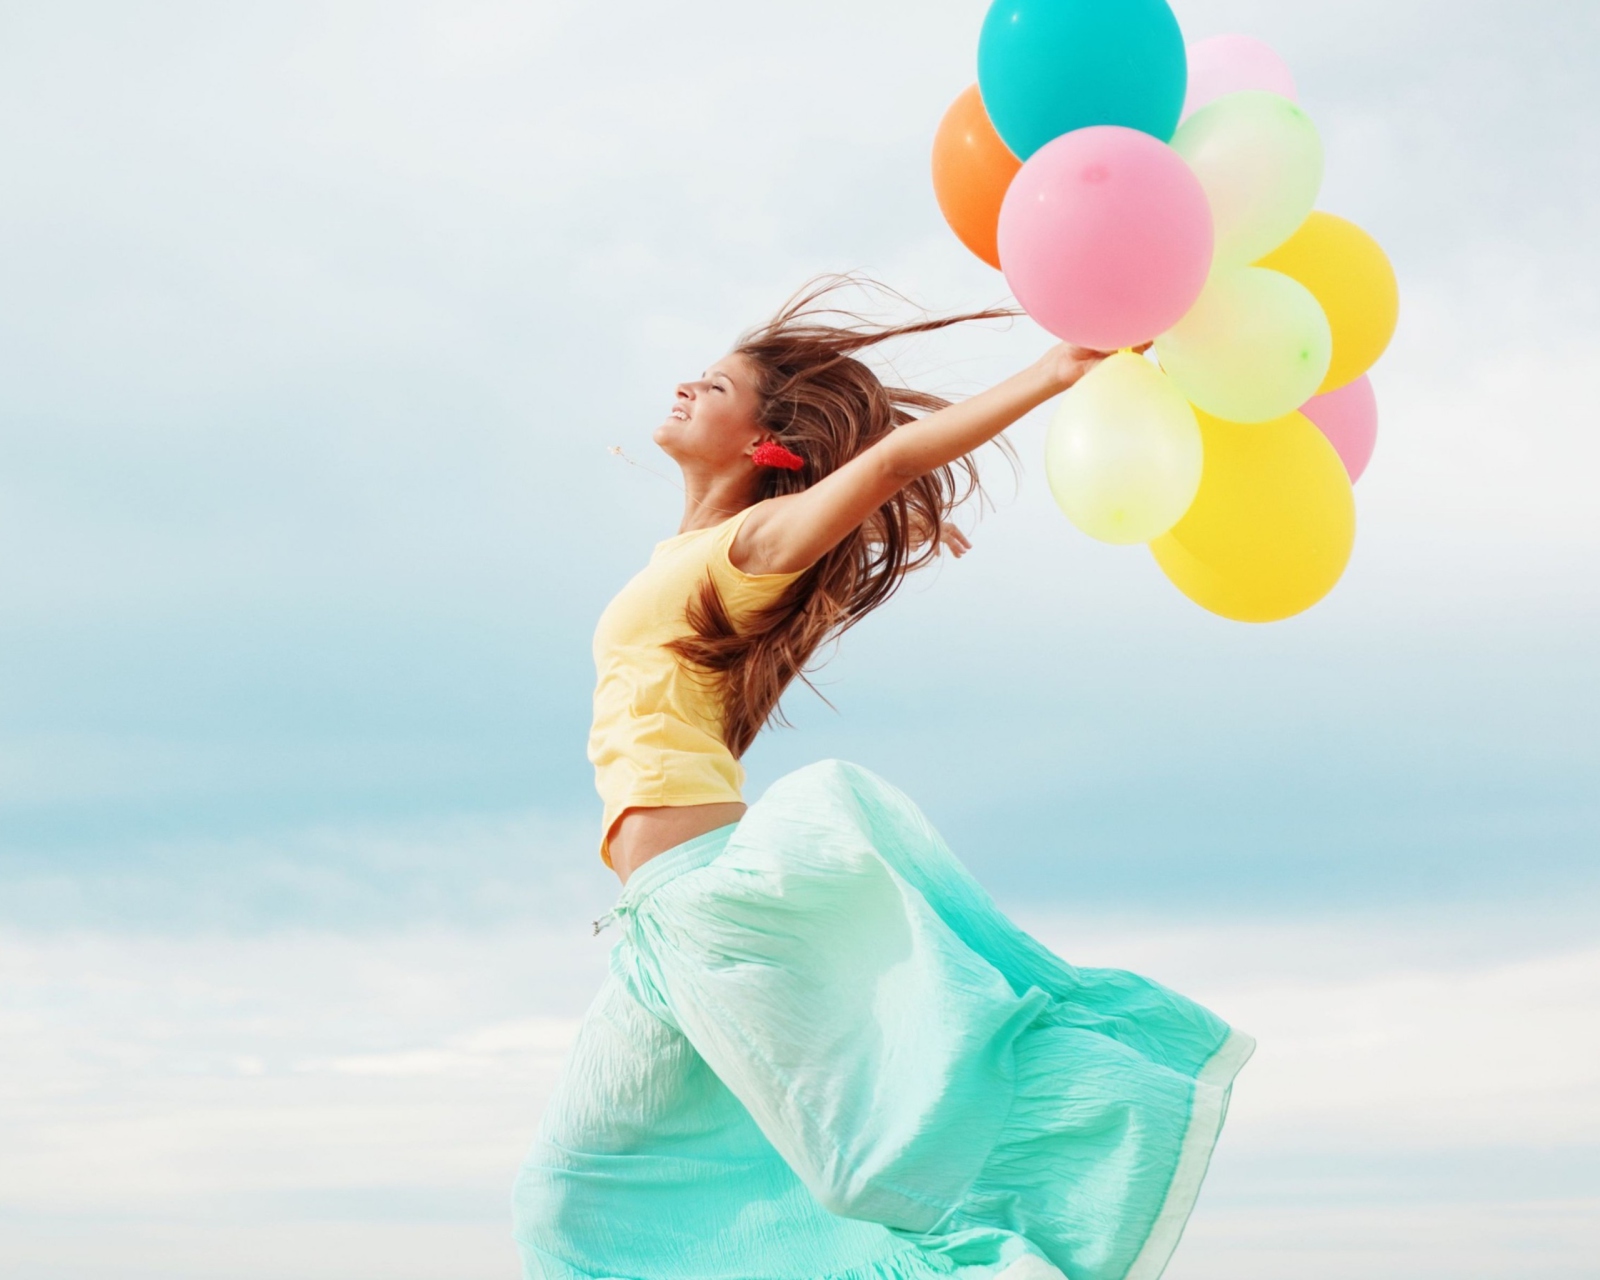 Girl With Colorful Balloons wallpaper 1600x1280